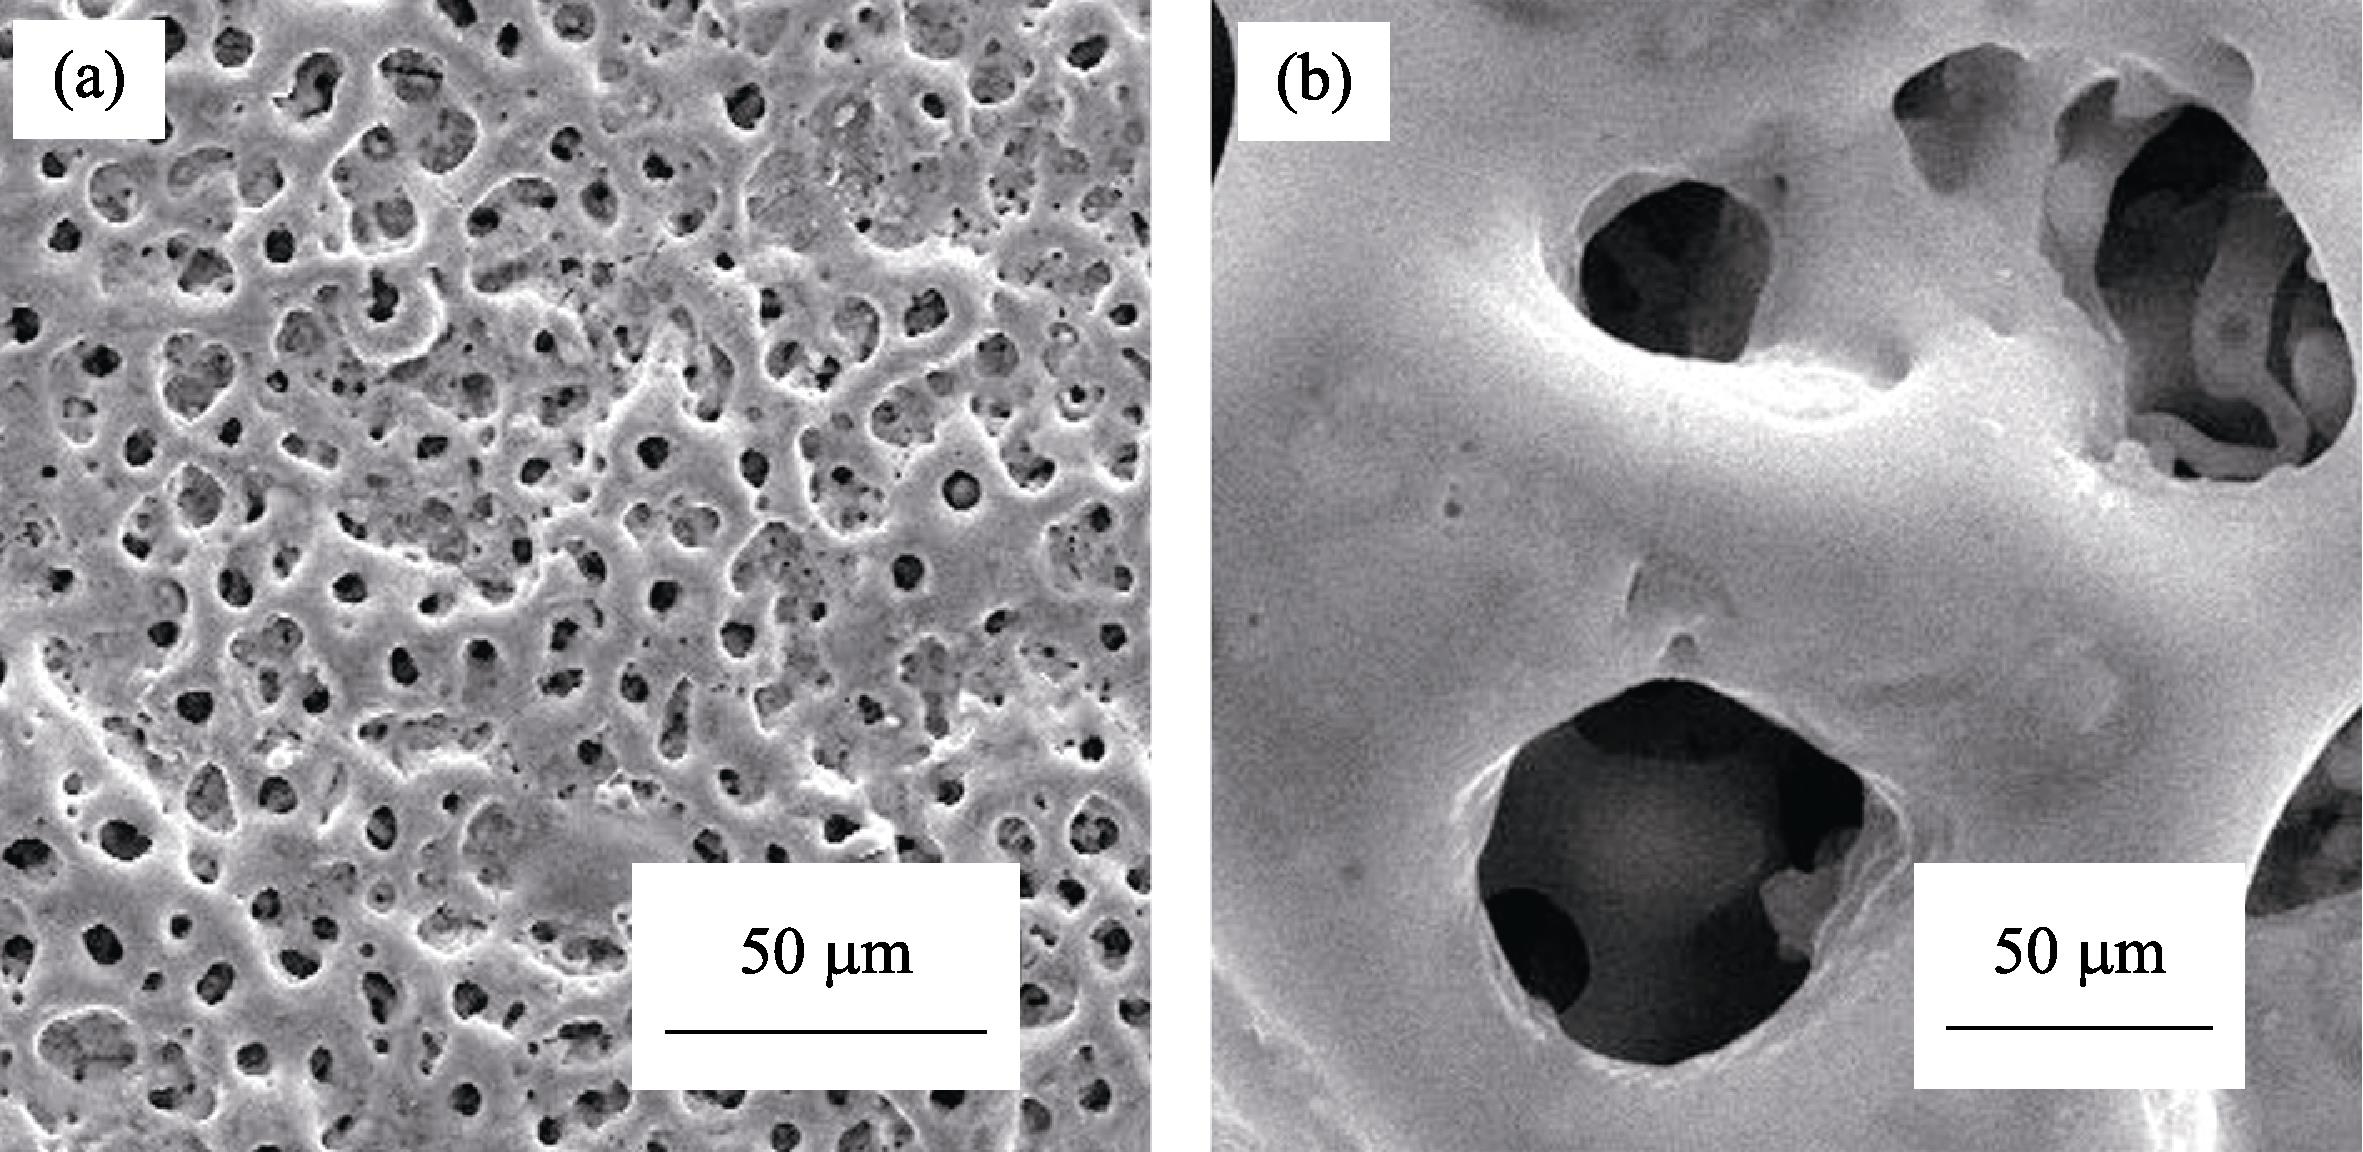 XRD patterns of SrTiO3 samples prepared under different hydrothermal conditions